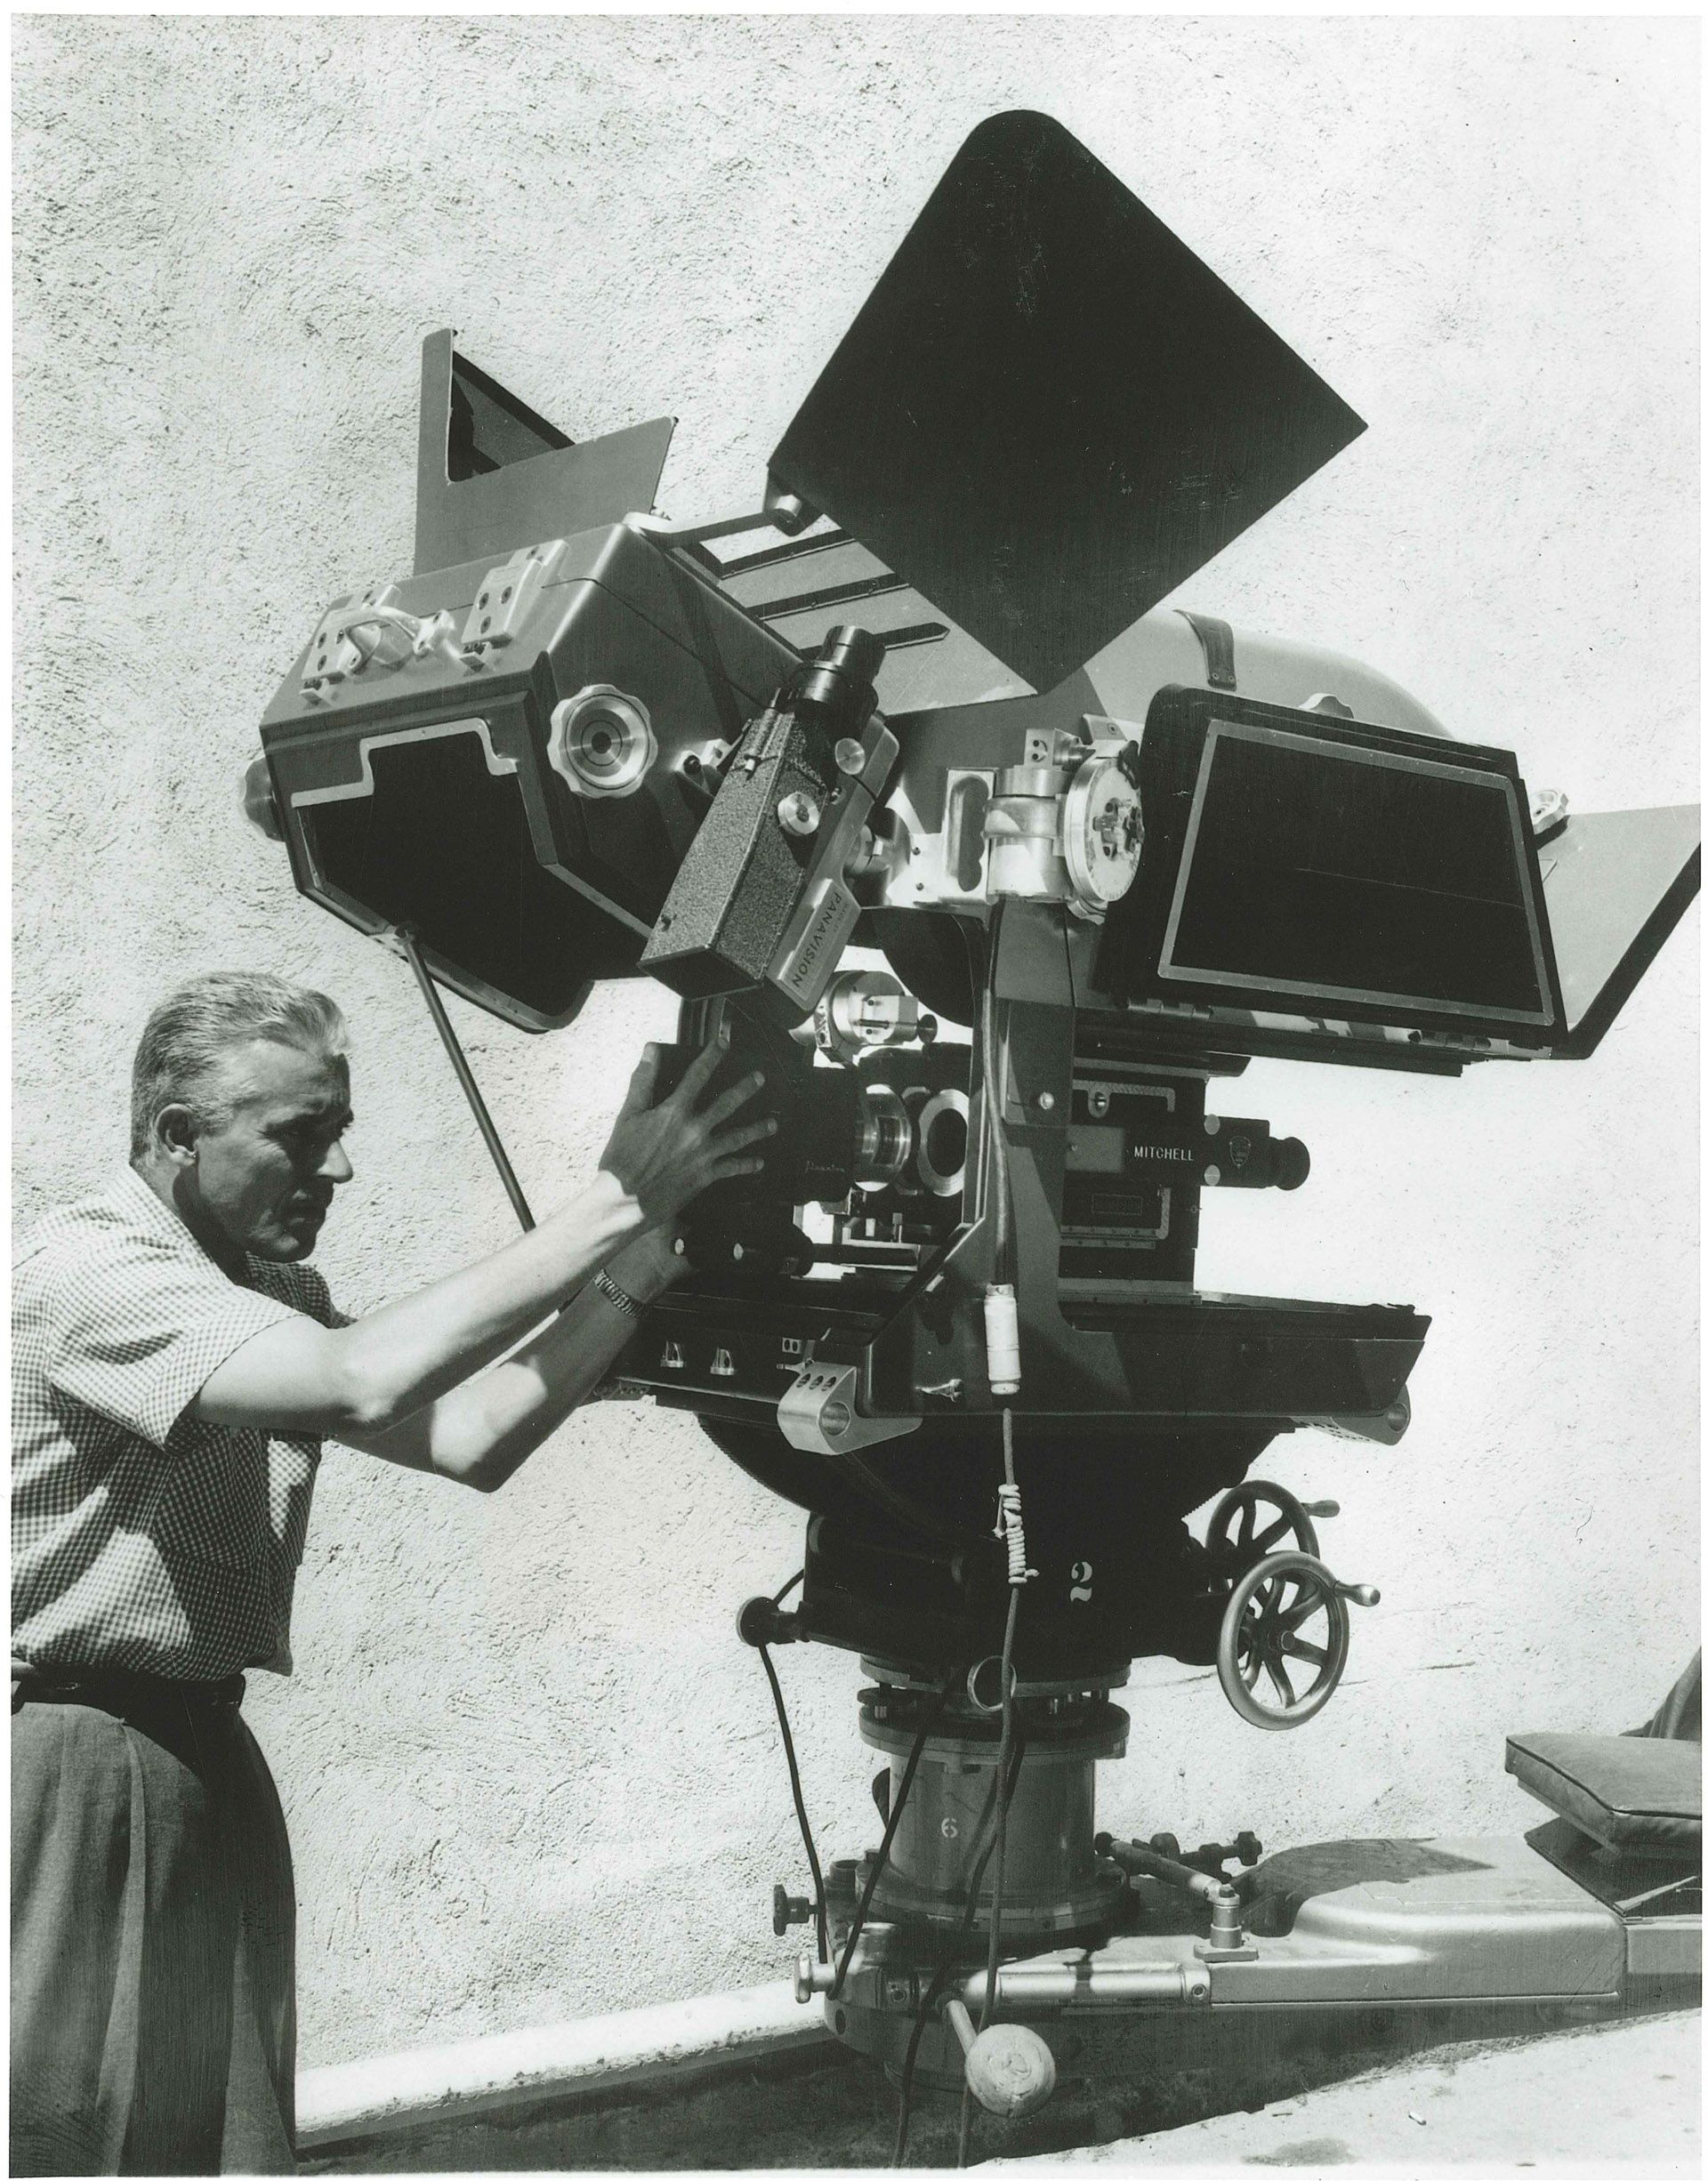 1957.-The-first-65mm-Panavision-camera-used-on-Ben-Hur.-The-assistant-is-mounting-an-Anamorphic-APO-Panatar-designed-for-Ultra-Panavision-70-MGM-Camera-65-credit-Panavision_67645e919b12432e590b303456de6e74.jpg